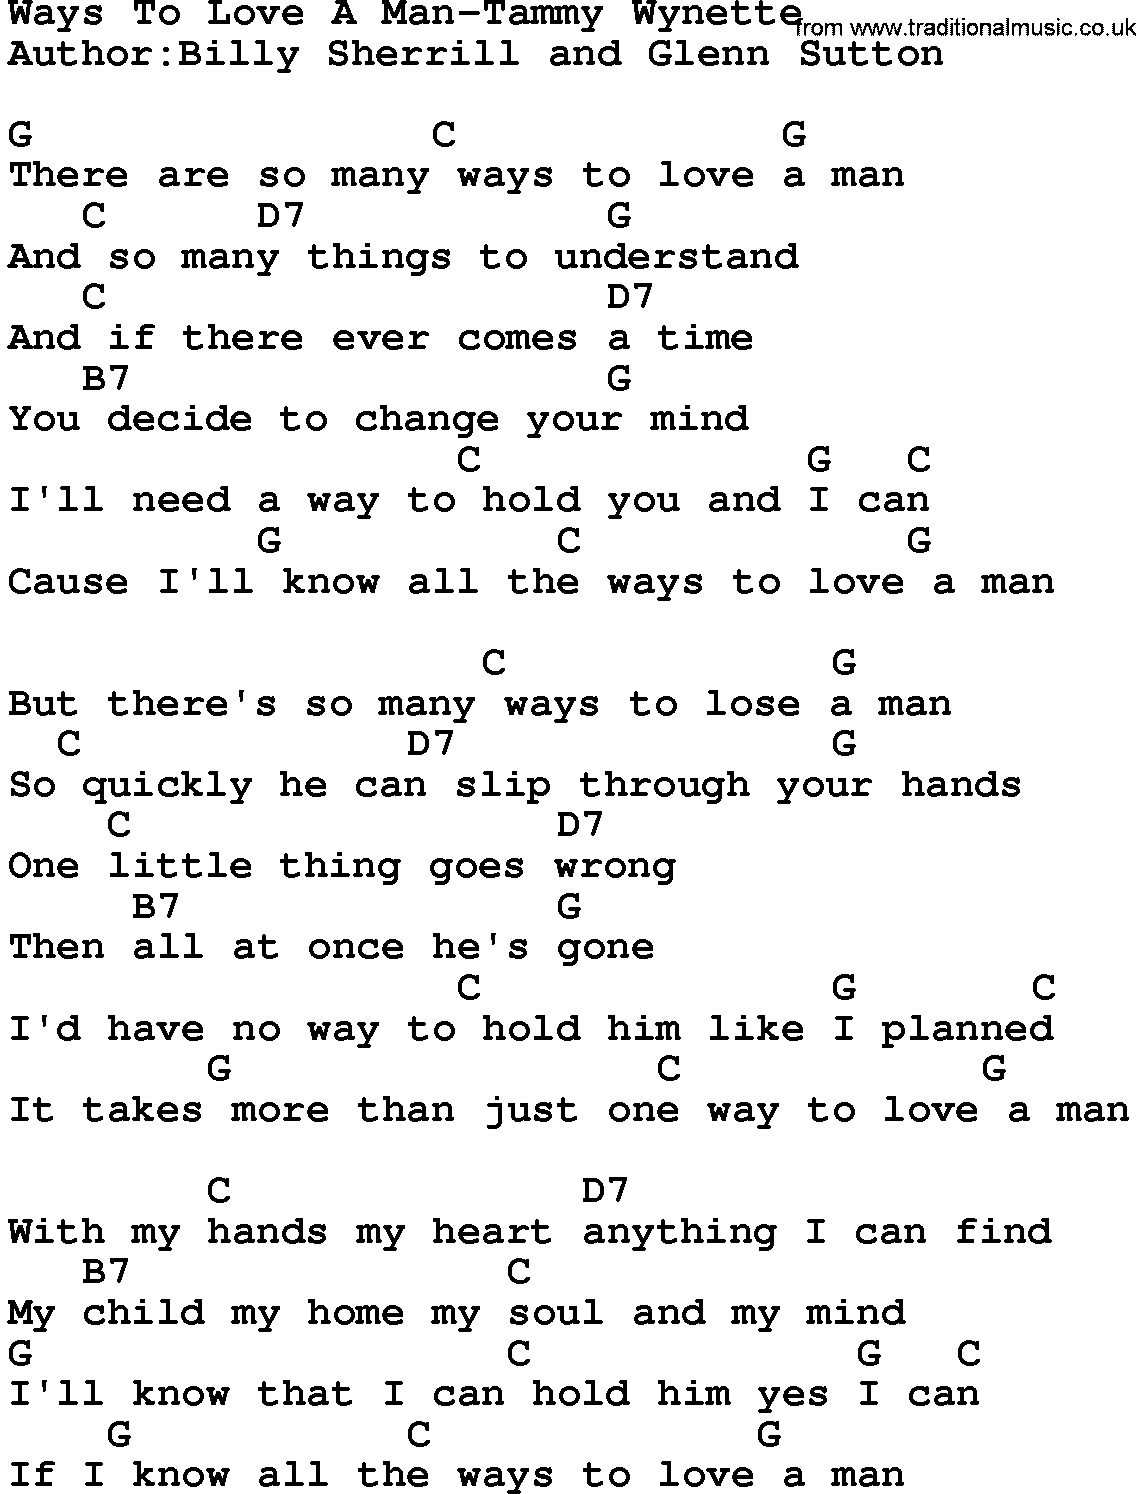 Country music song: Ways To Love A Man-Tammy Wynette lyrics and chords